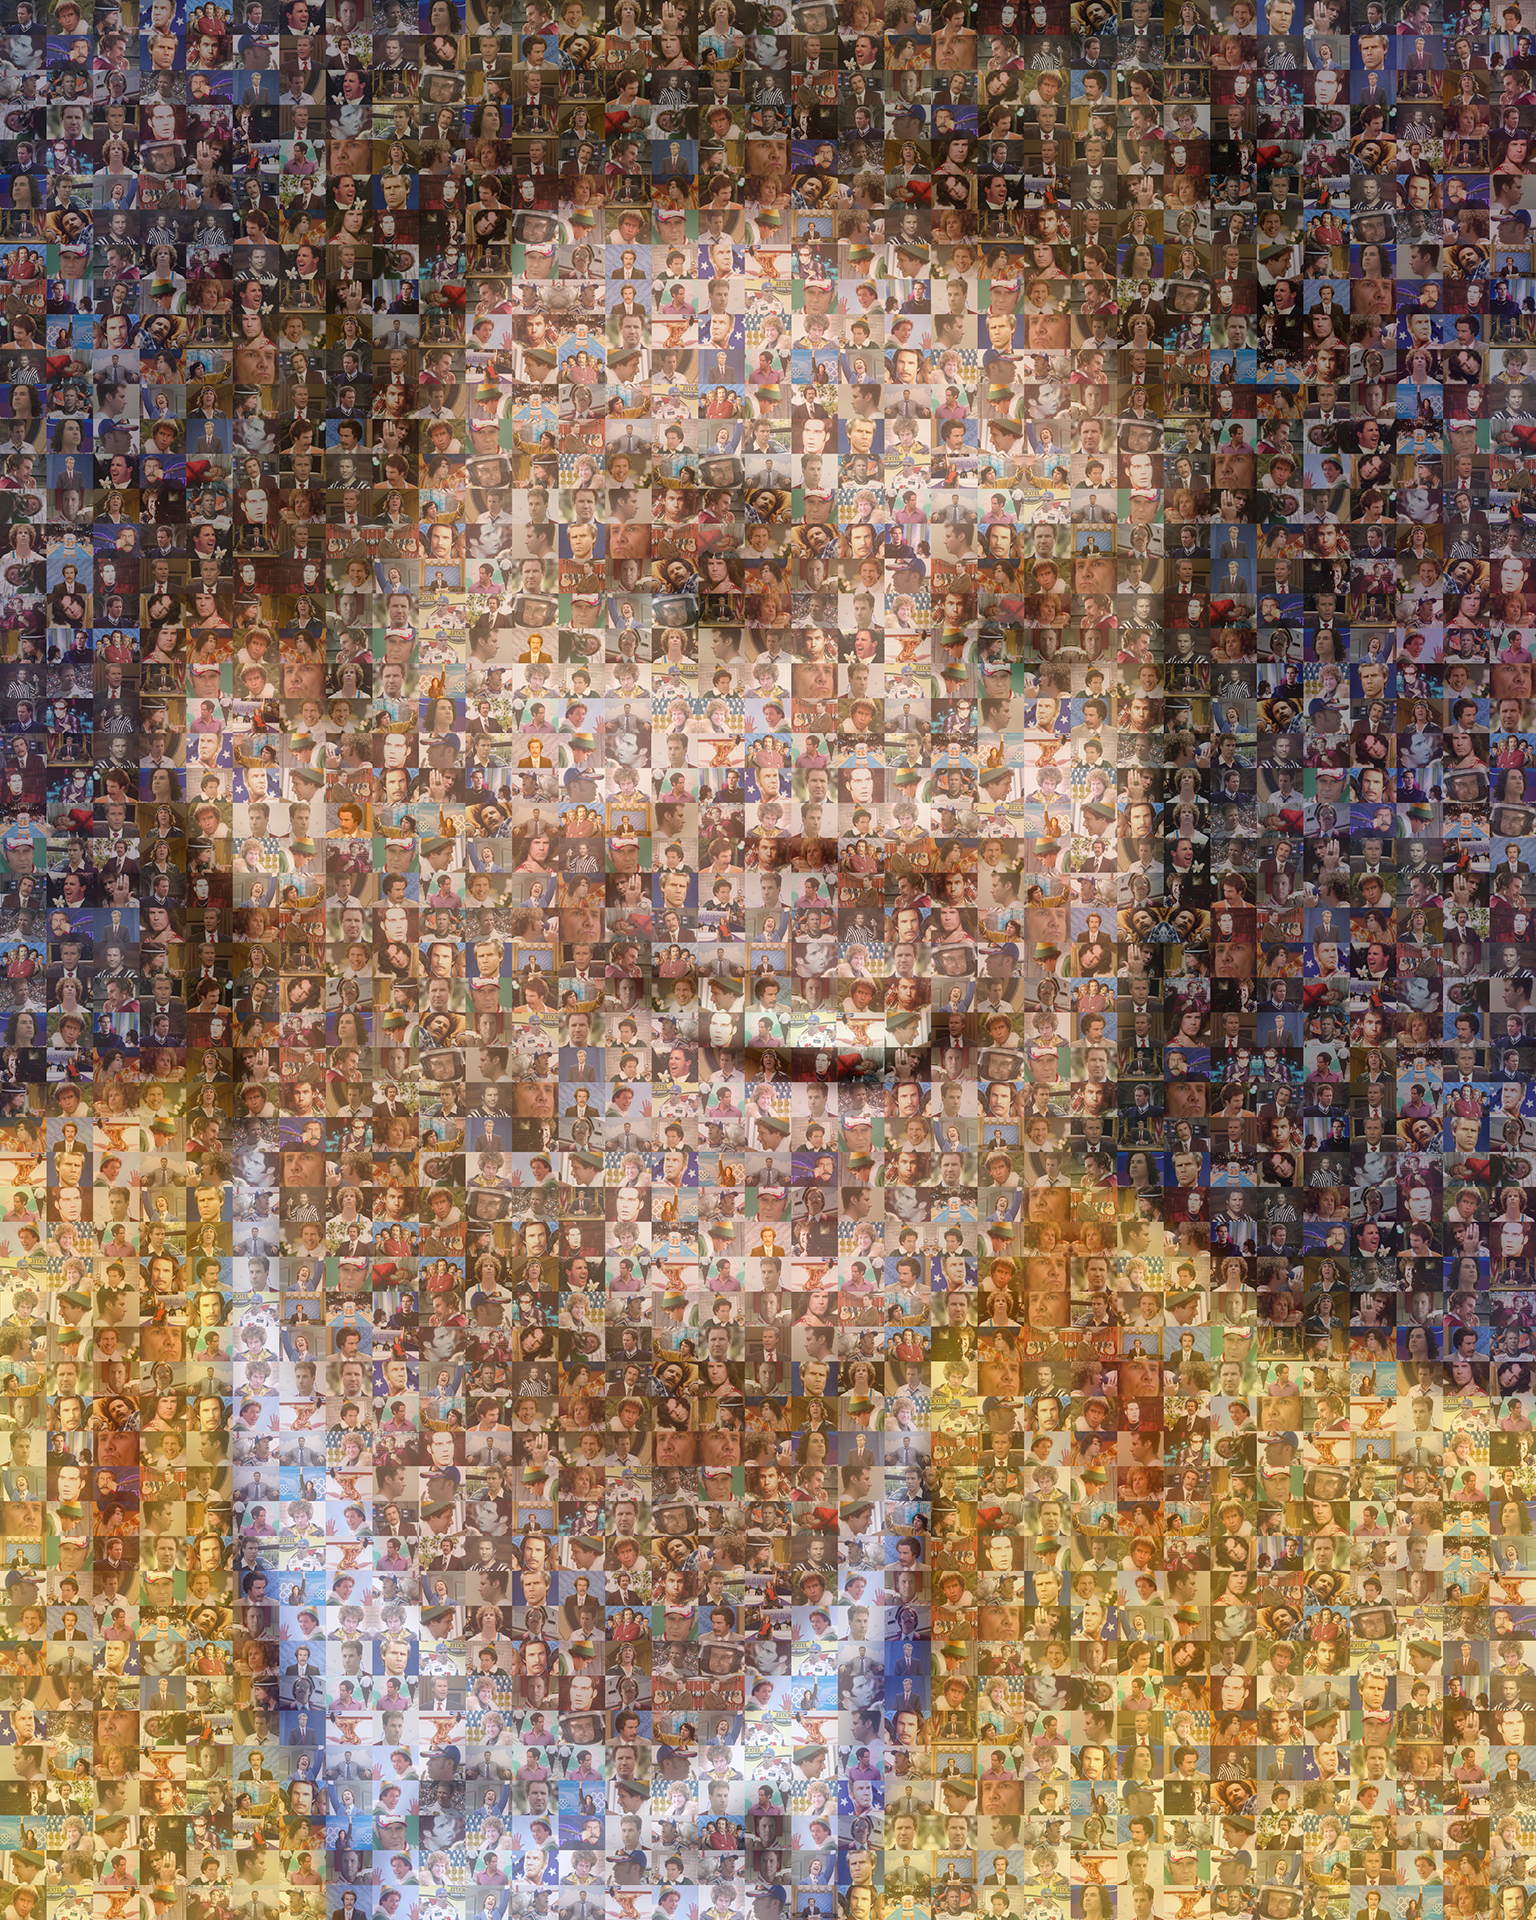 photo mosaic Using only 130 photos his movies, we created this stunning portrait of Will Ferrell